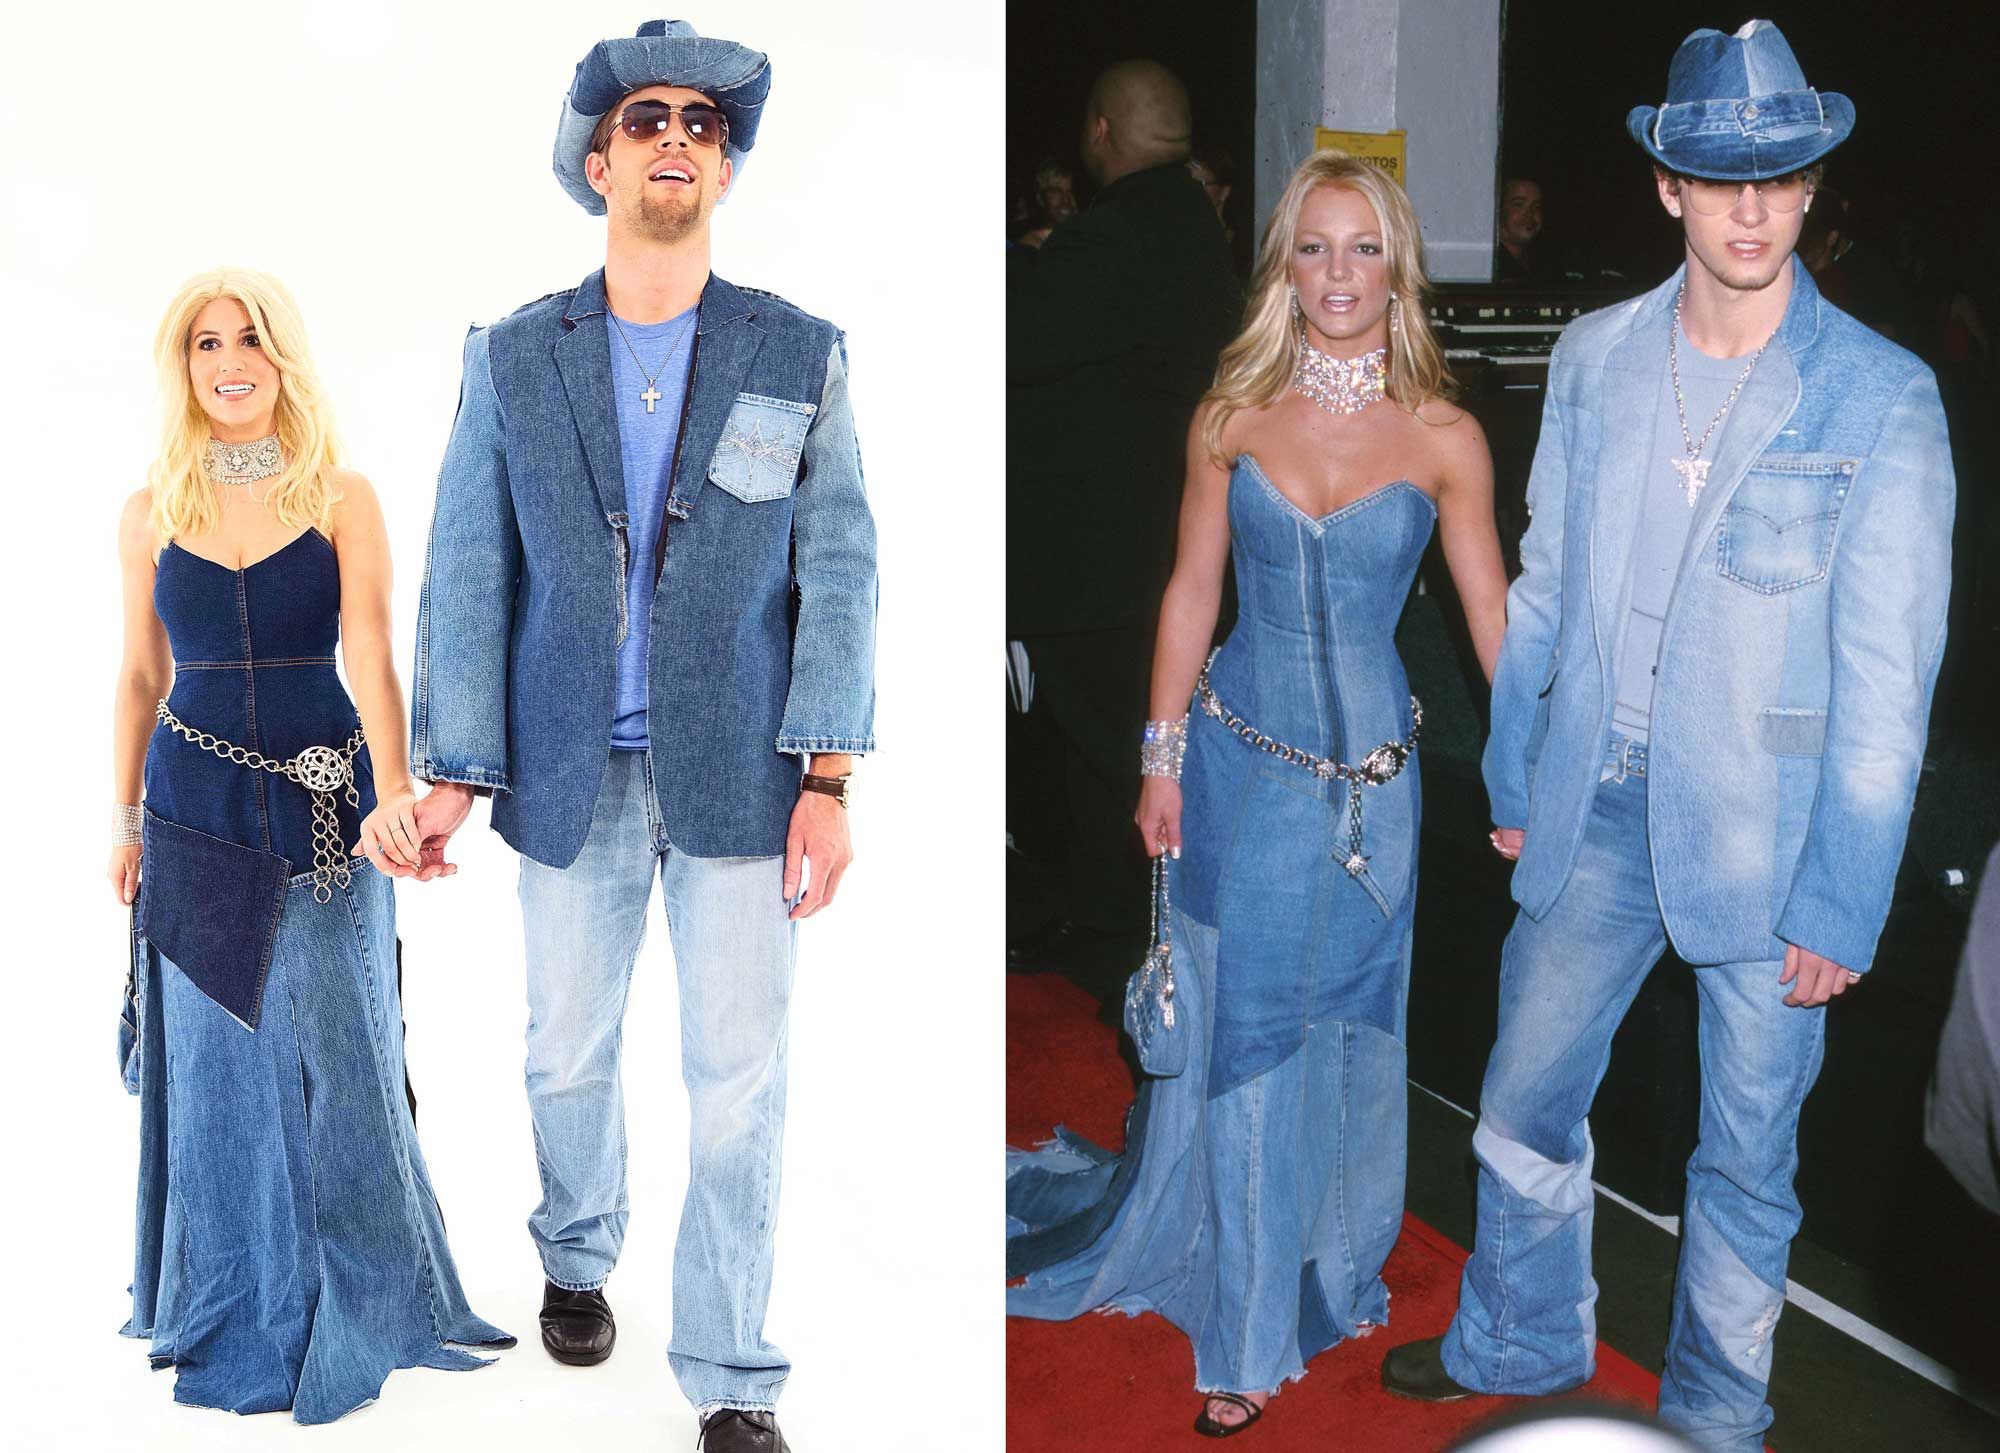 How to DIY the Top 5 Britney Spears Looks for Halloween | Britney spears, Britney  spears costume, Britney spears halloween costume